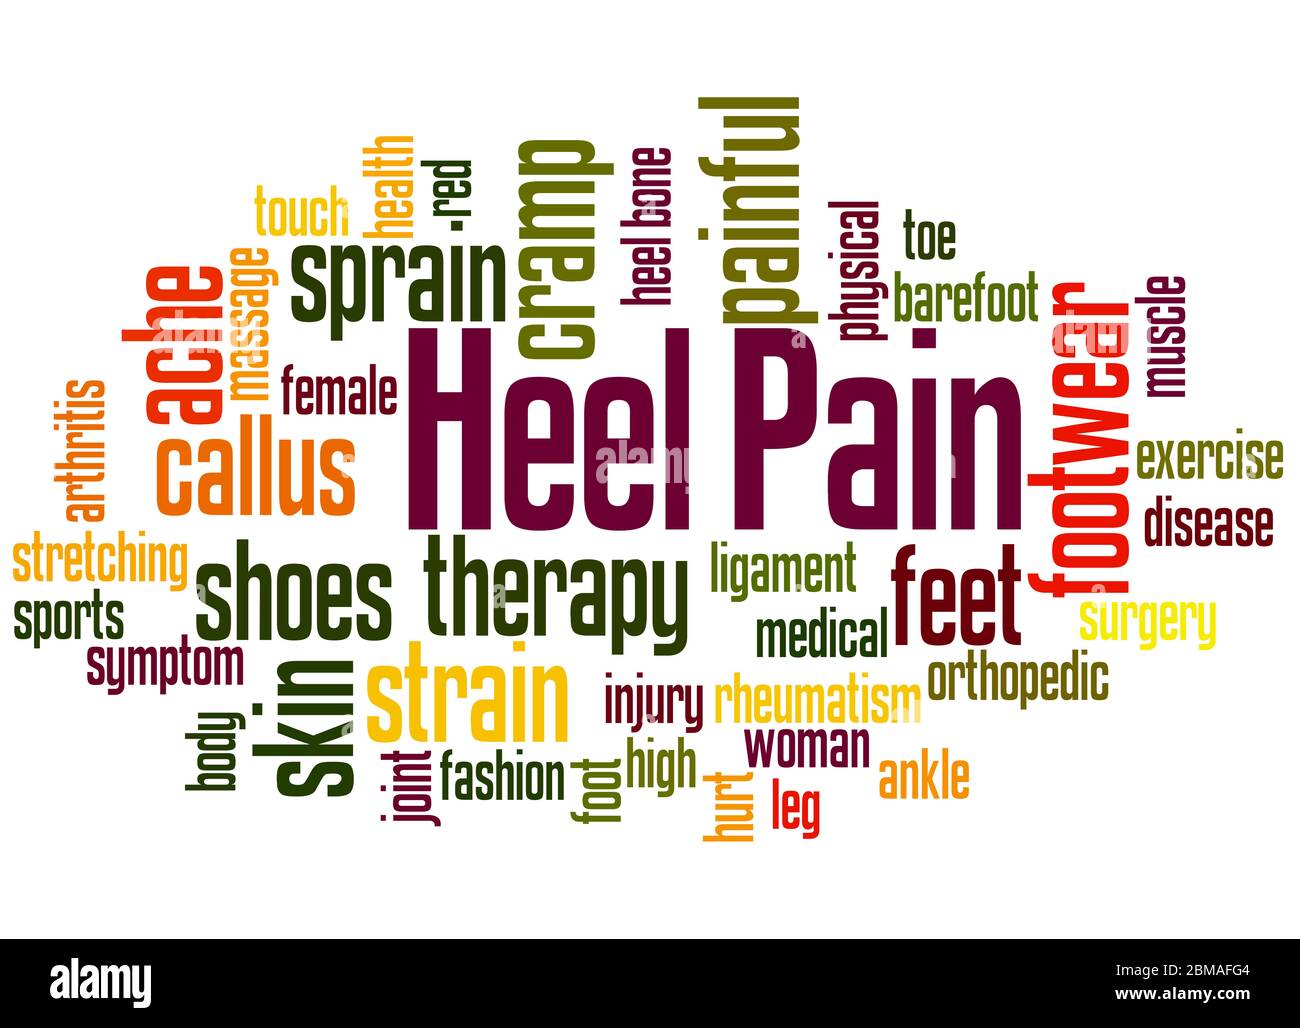 Heel Pain word cloud concept on white background. Stock Photo